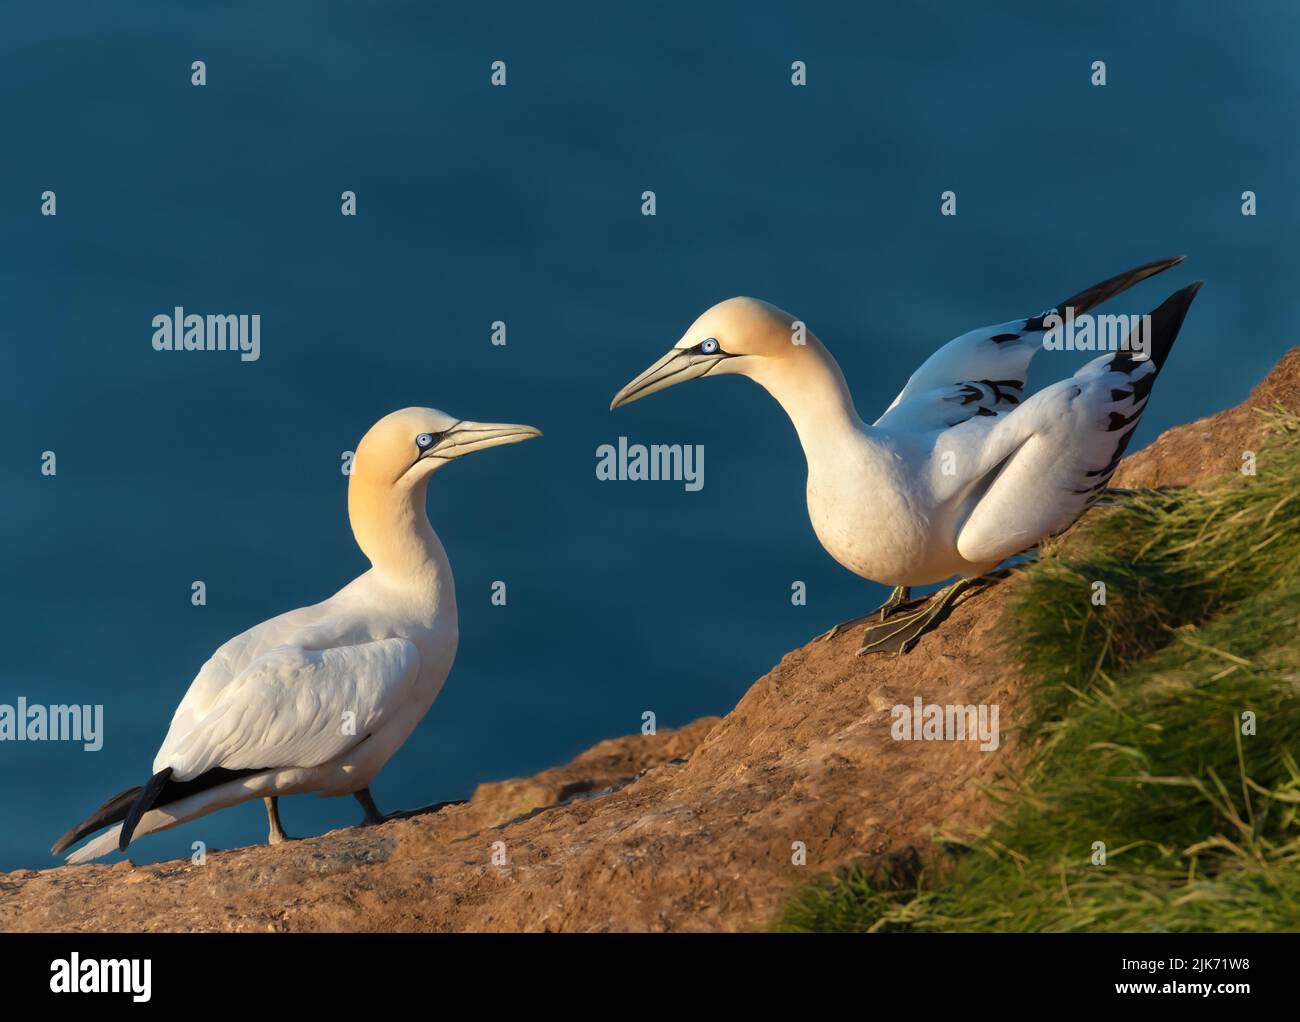 Close up of bonding Northern gannets (Morus bassana) on a cliff by the North sea, Bempton cliffs, UK. Stock Photo